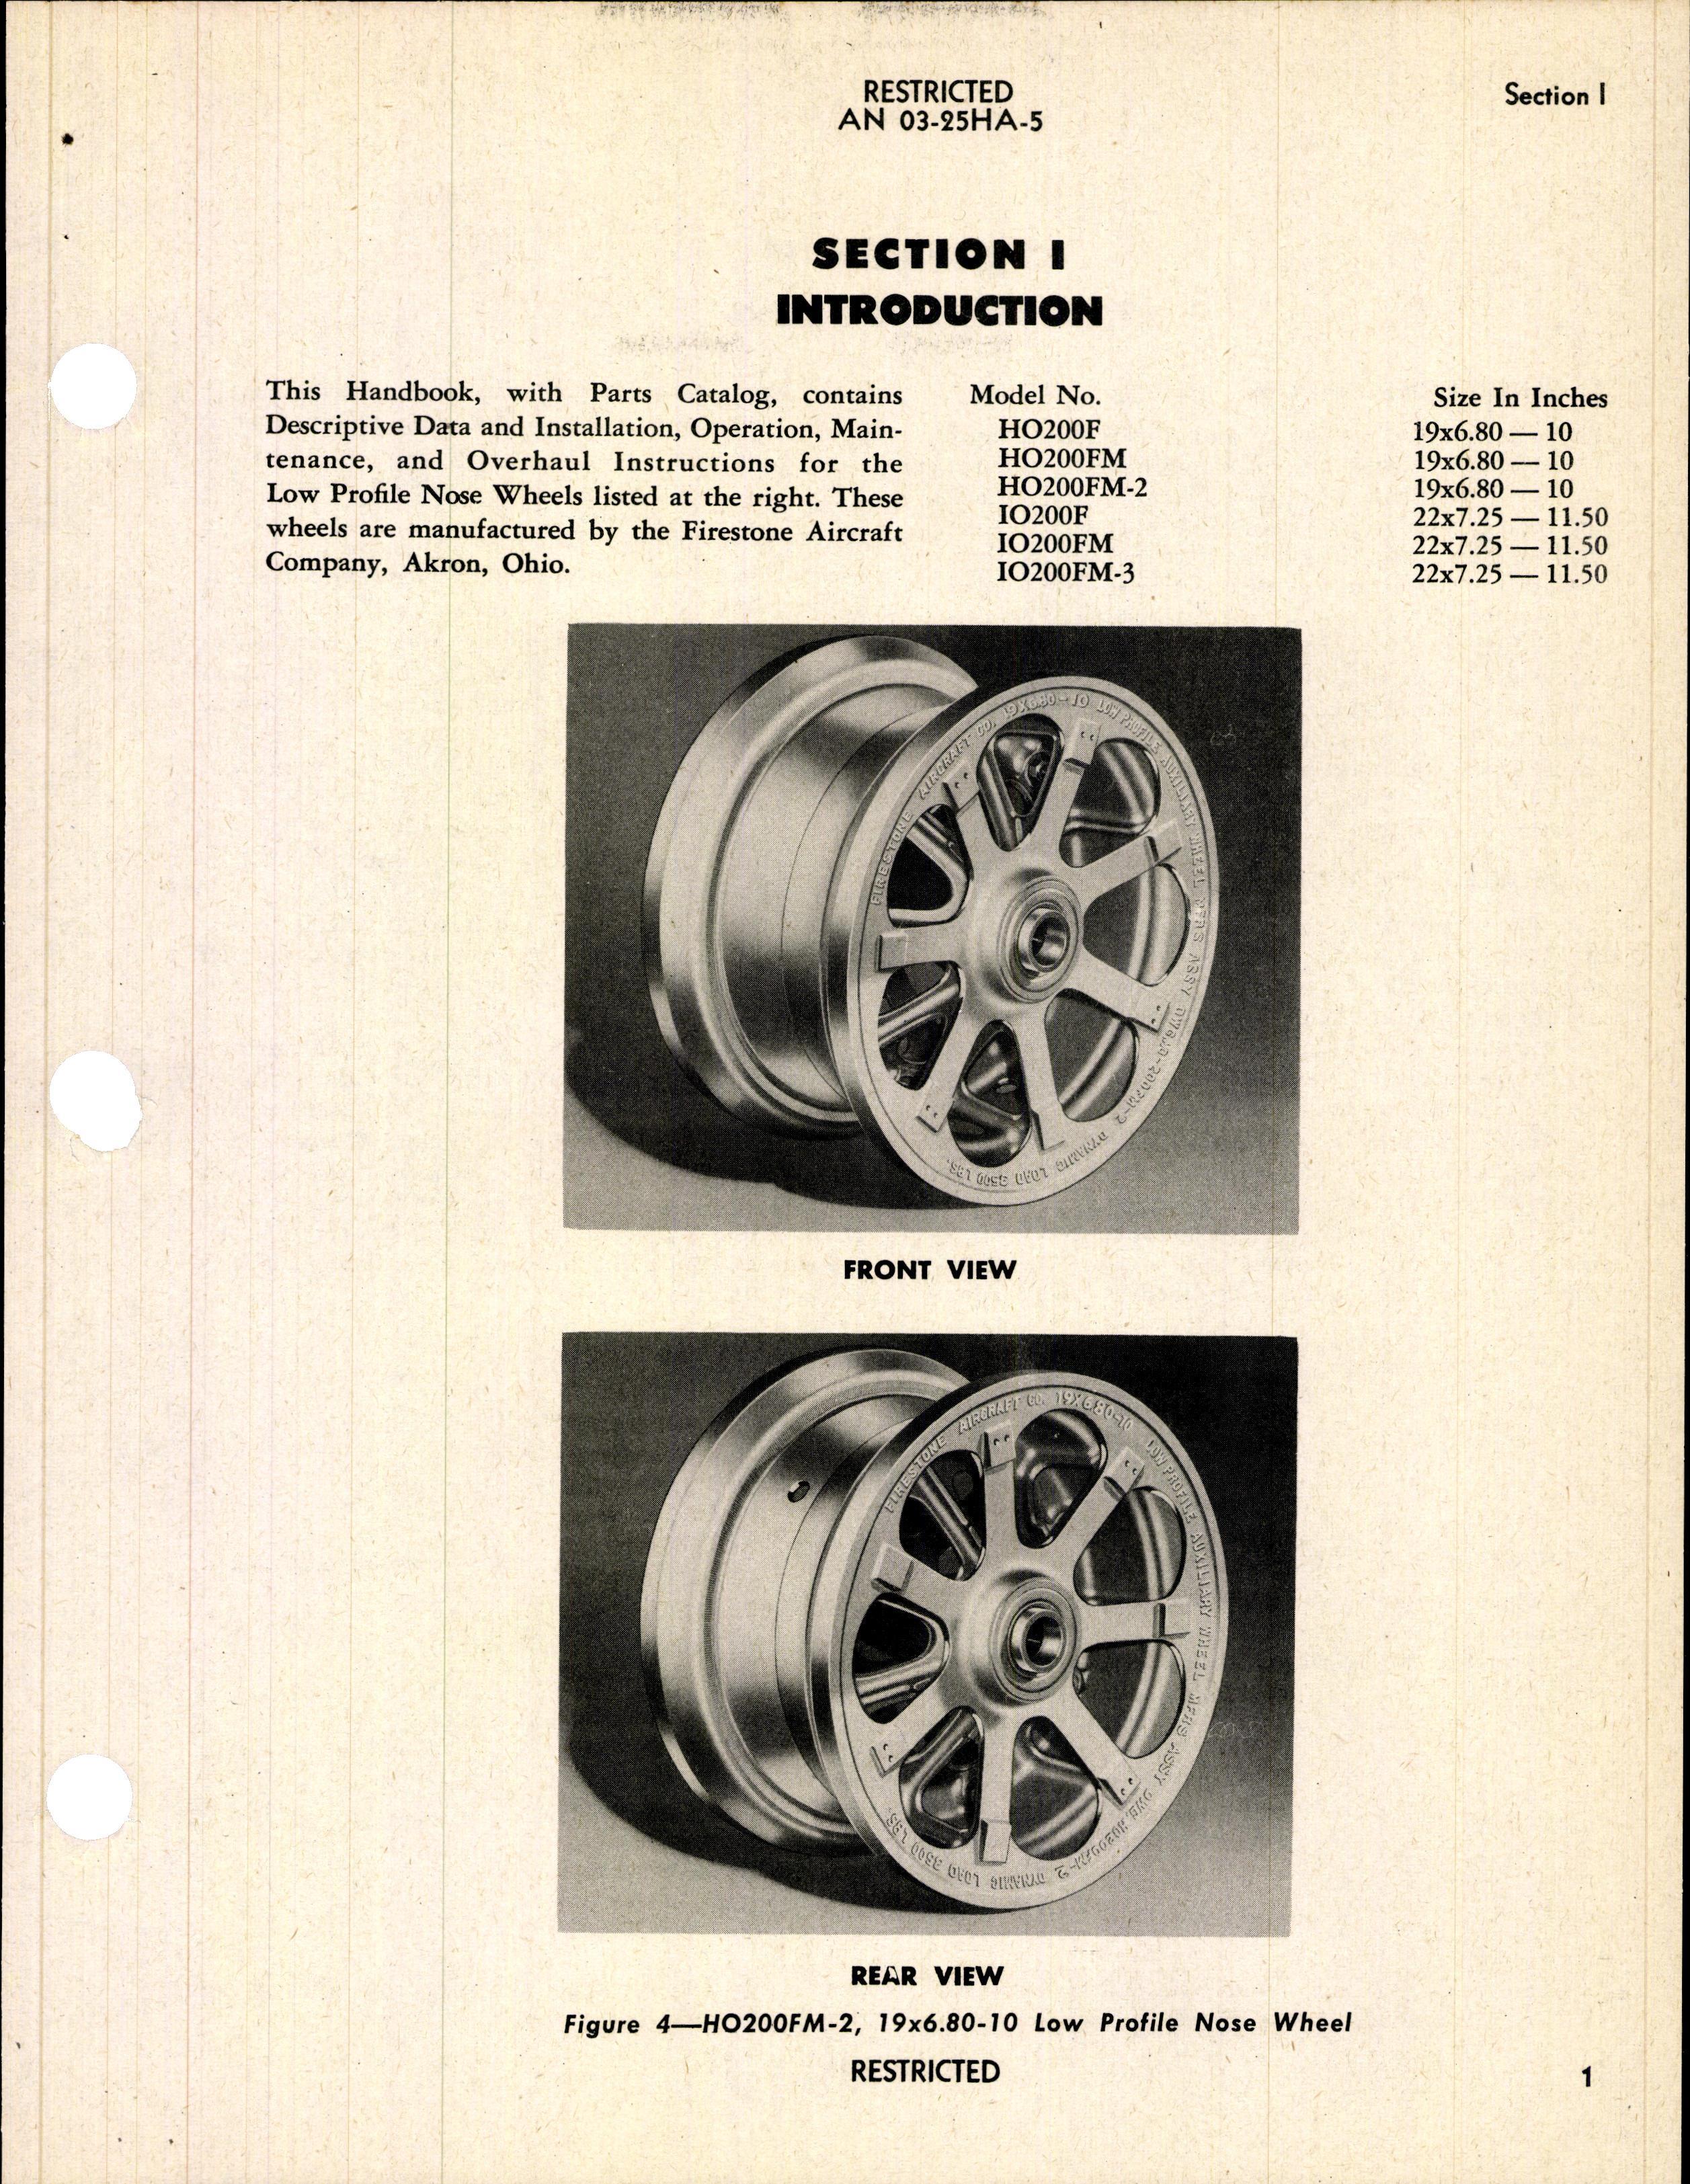 Sample page 7 from AirCorps Library document: Operation, Service & Overhaul Instructions with Parts Catalog for Nose Wheels (Firestone)